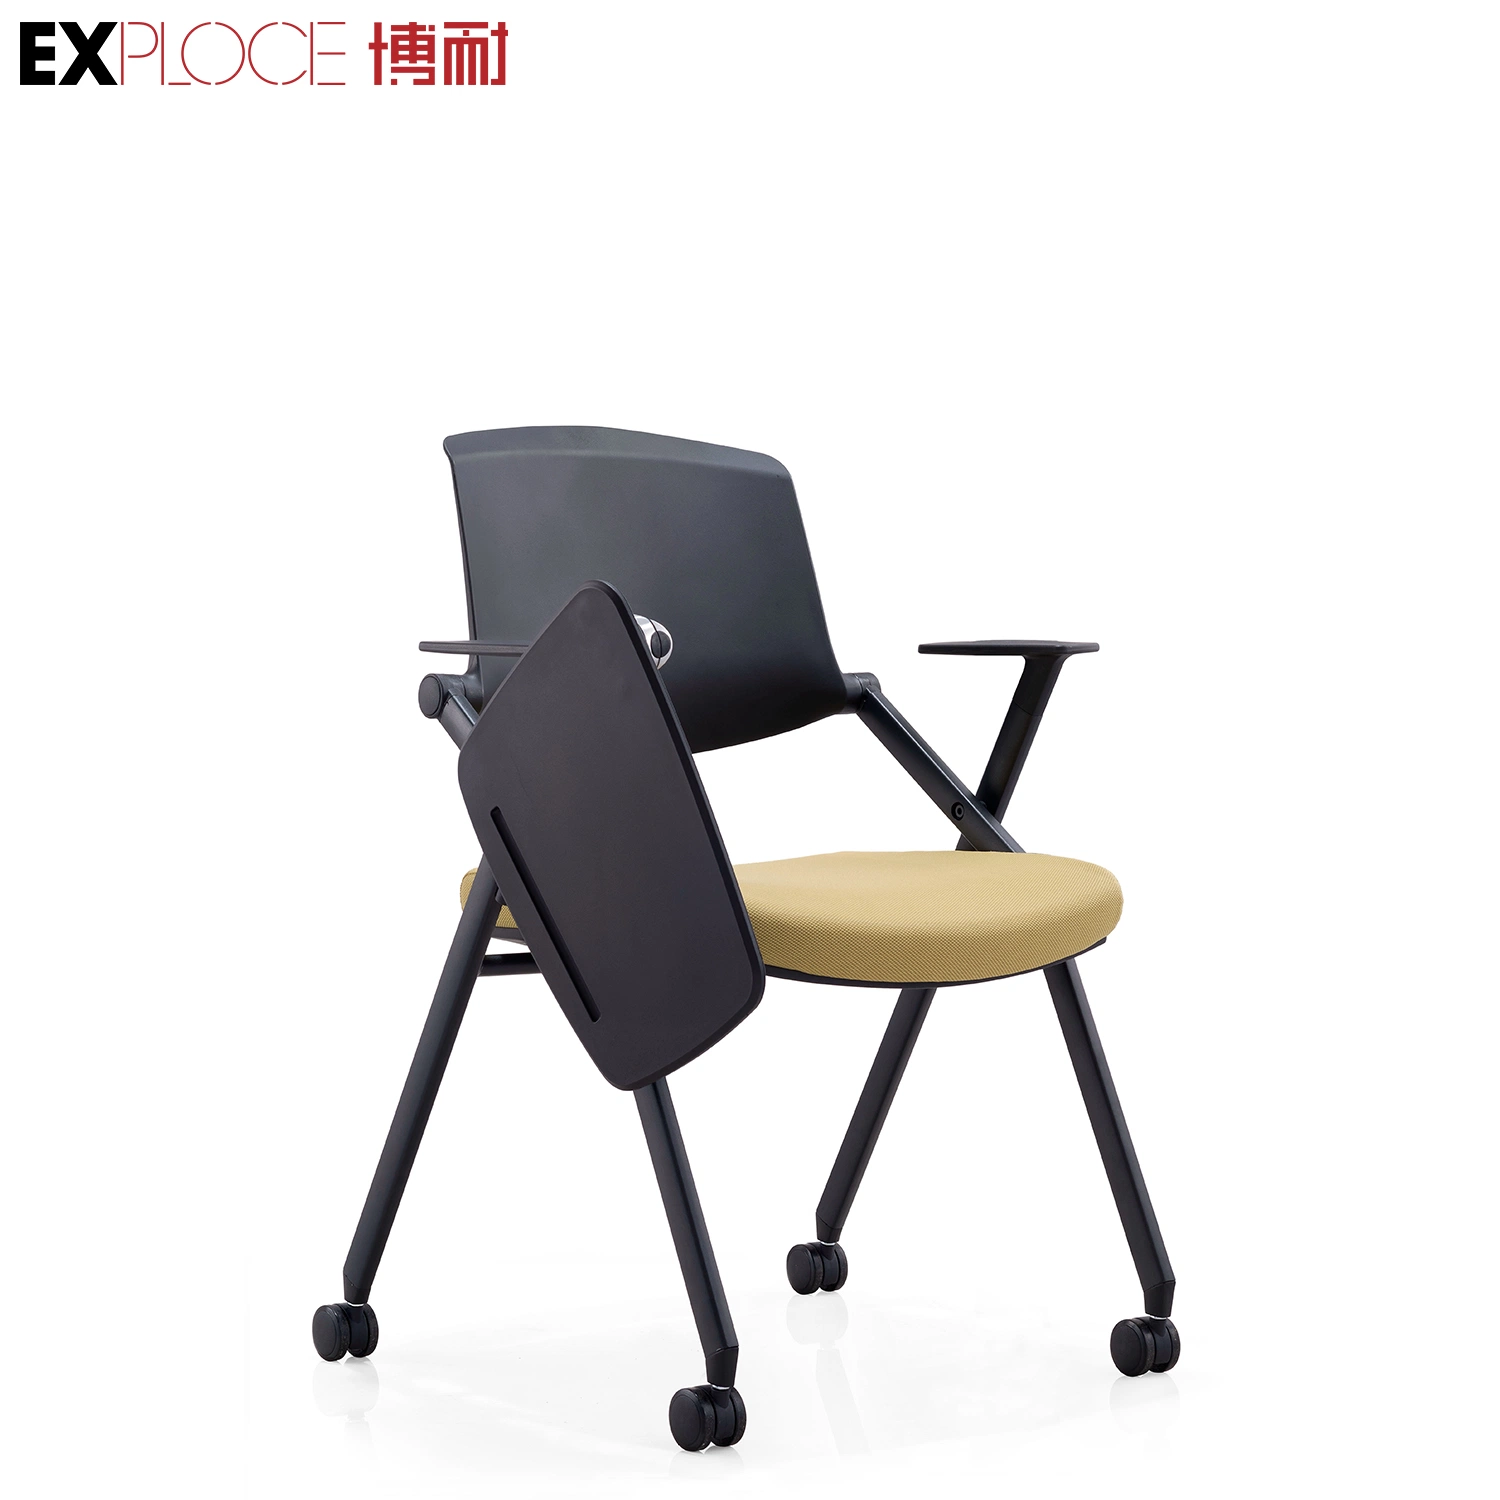 School Furniture Folding & Foldable Mesh Back & Seat Fabri Student Training Chair Meeting Chair Tilting Back Molding Seat Foam Armed Writing Table